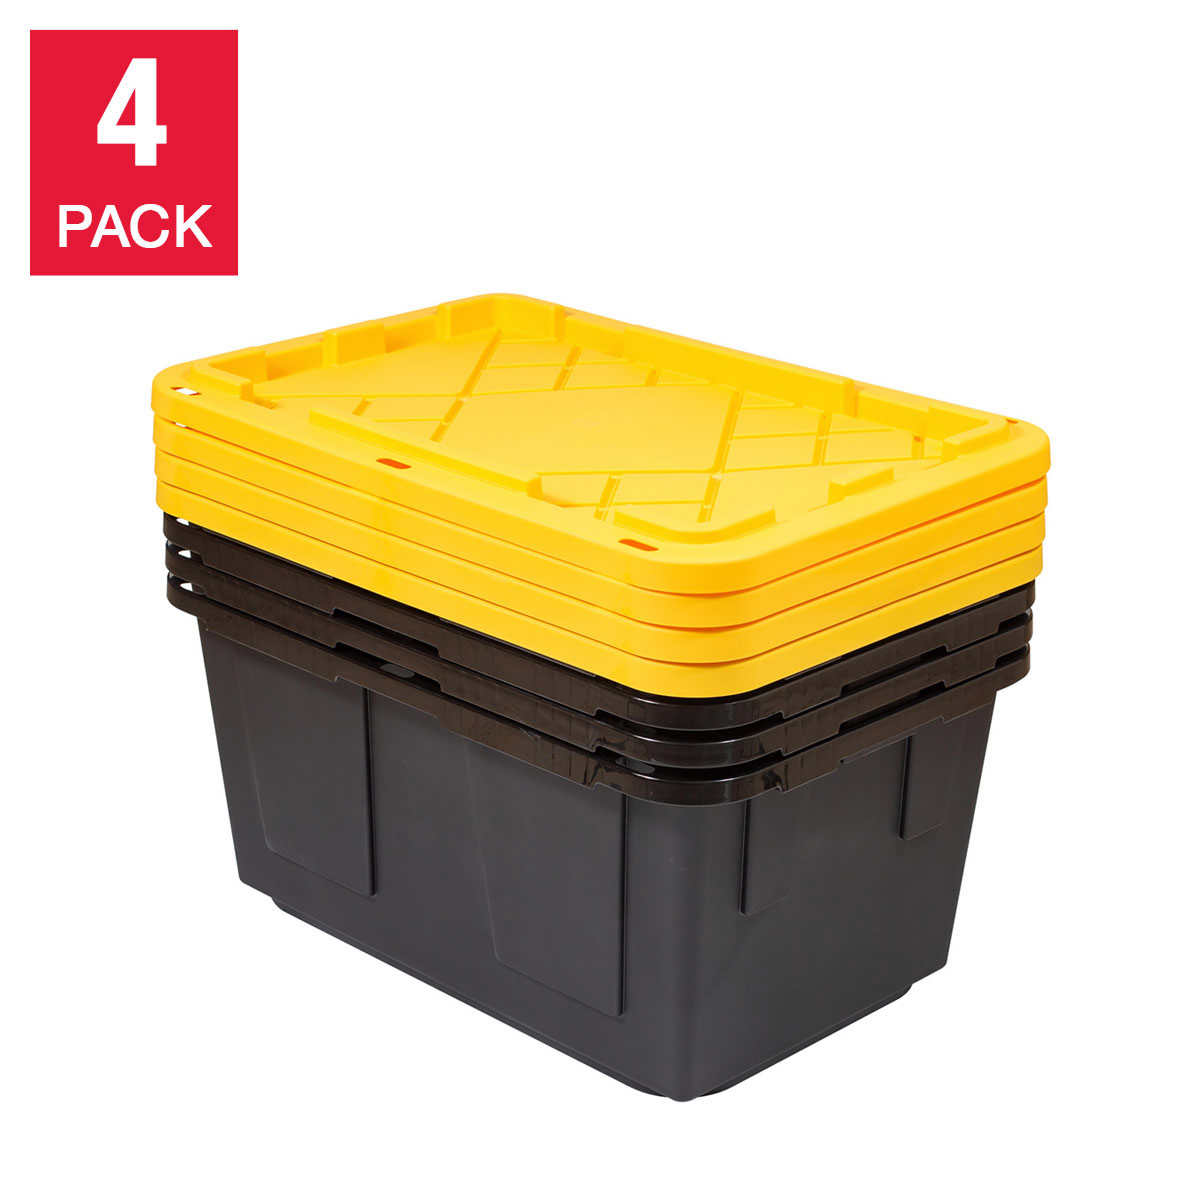 Disposable Trash Container Black w/Multi-Function Lid - Hydration Depot